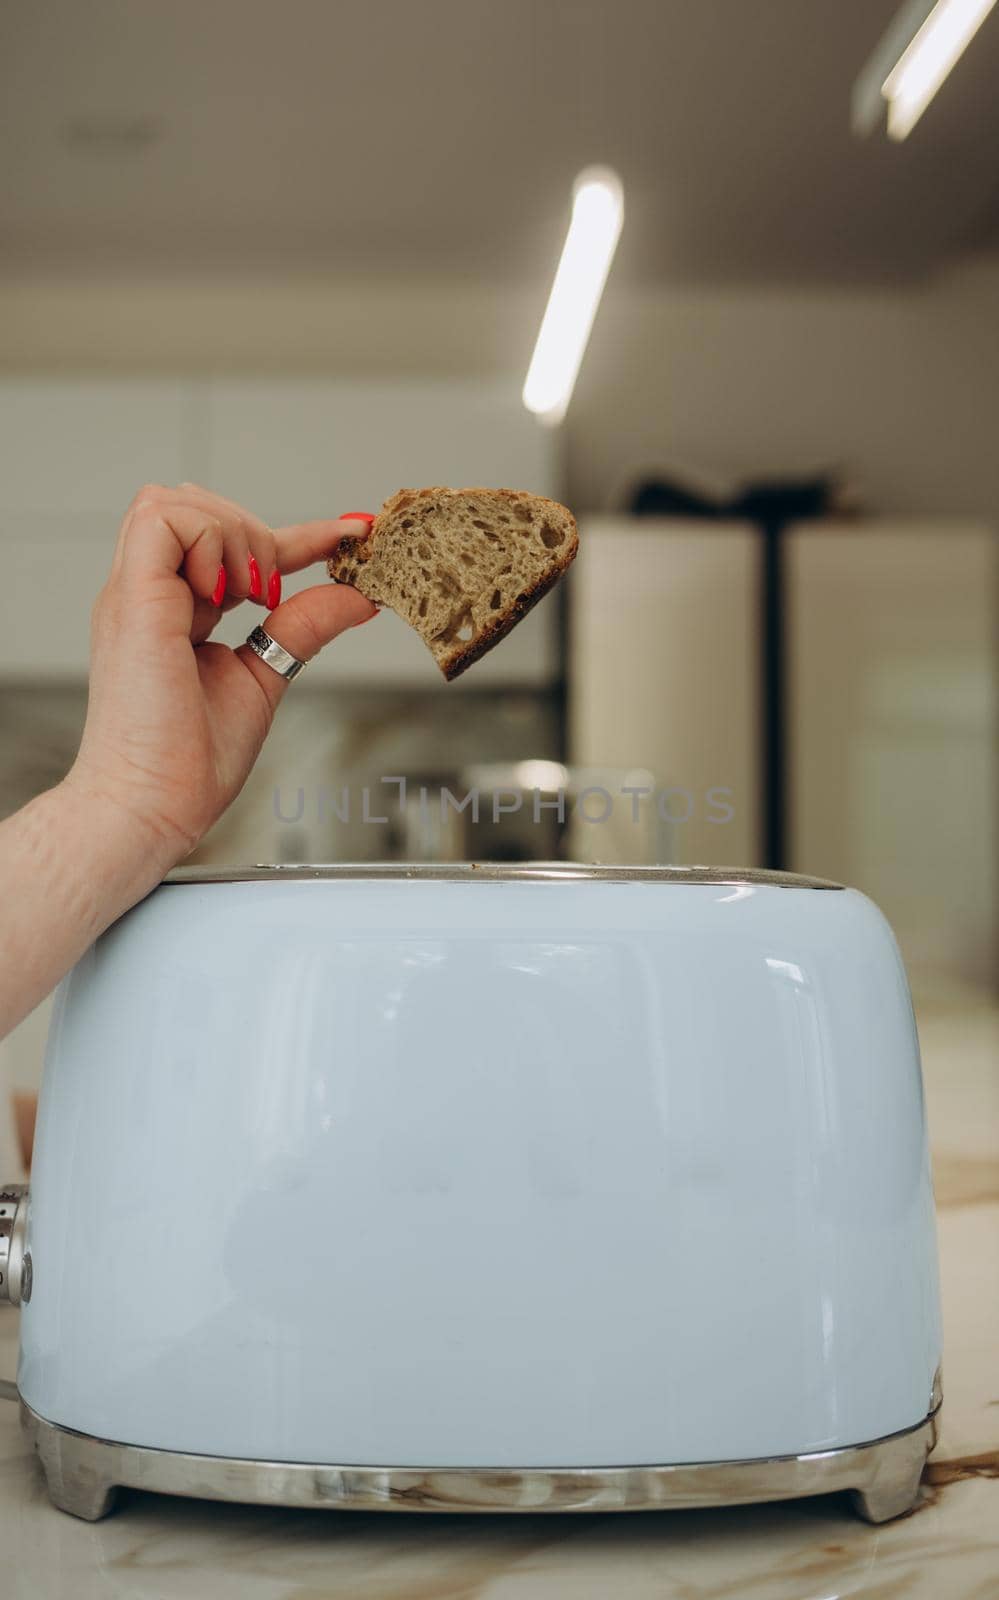 Young woman using toaster at table in kitchen.